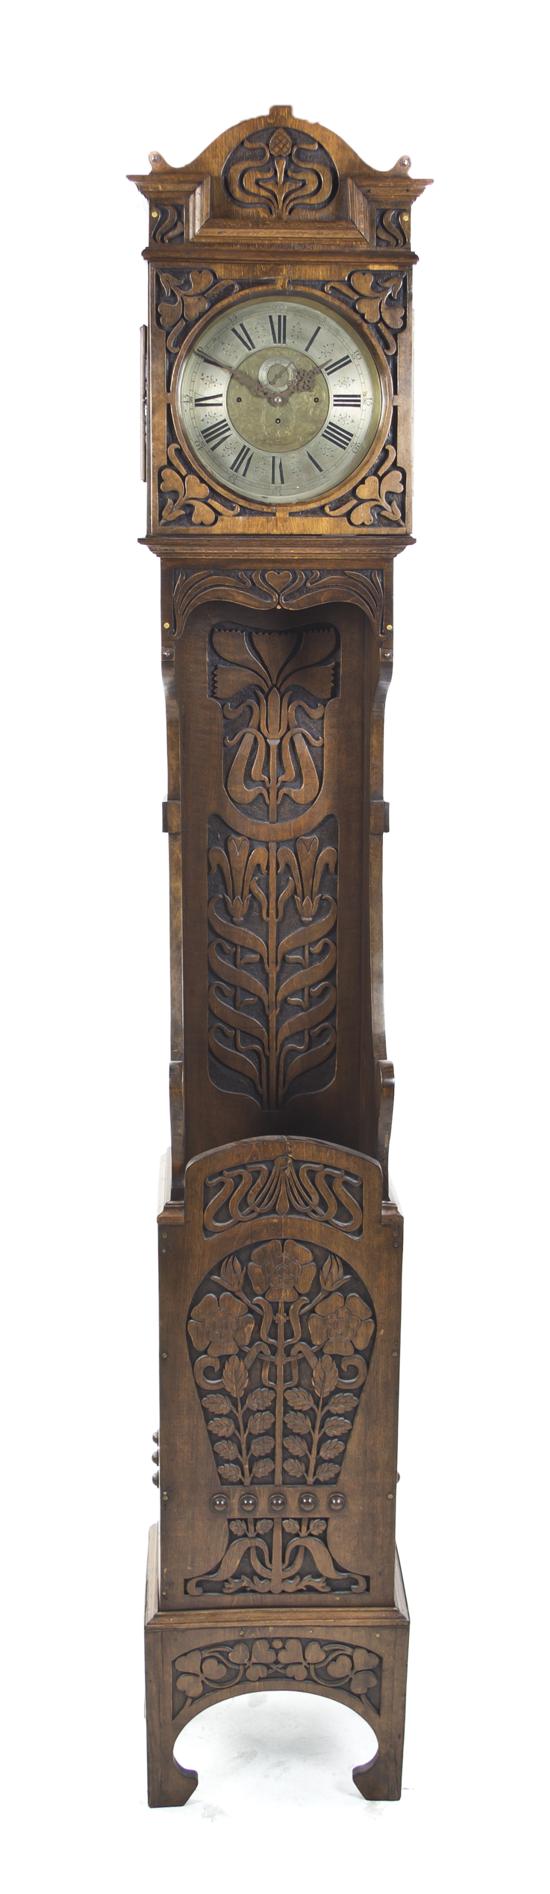 An American Arts and Crafts Oak Tall Case